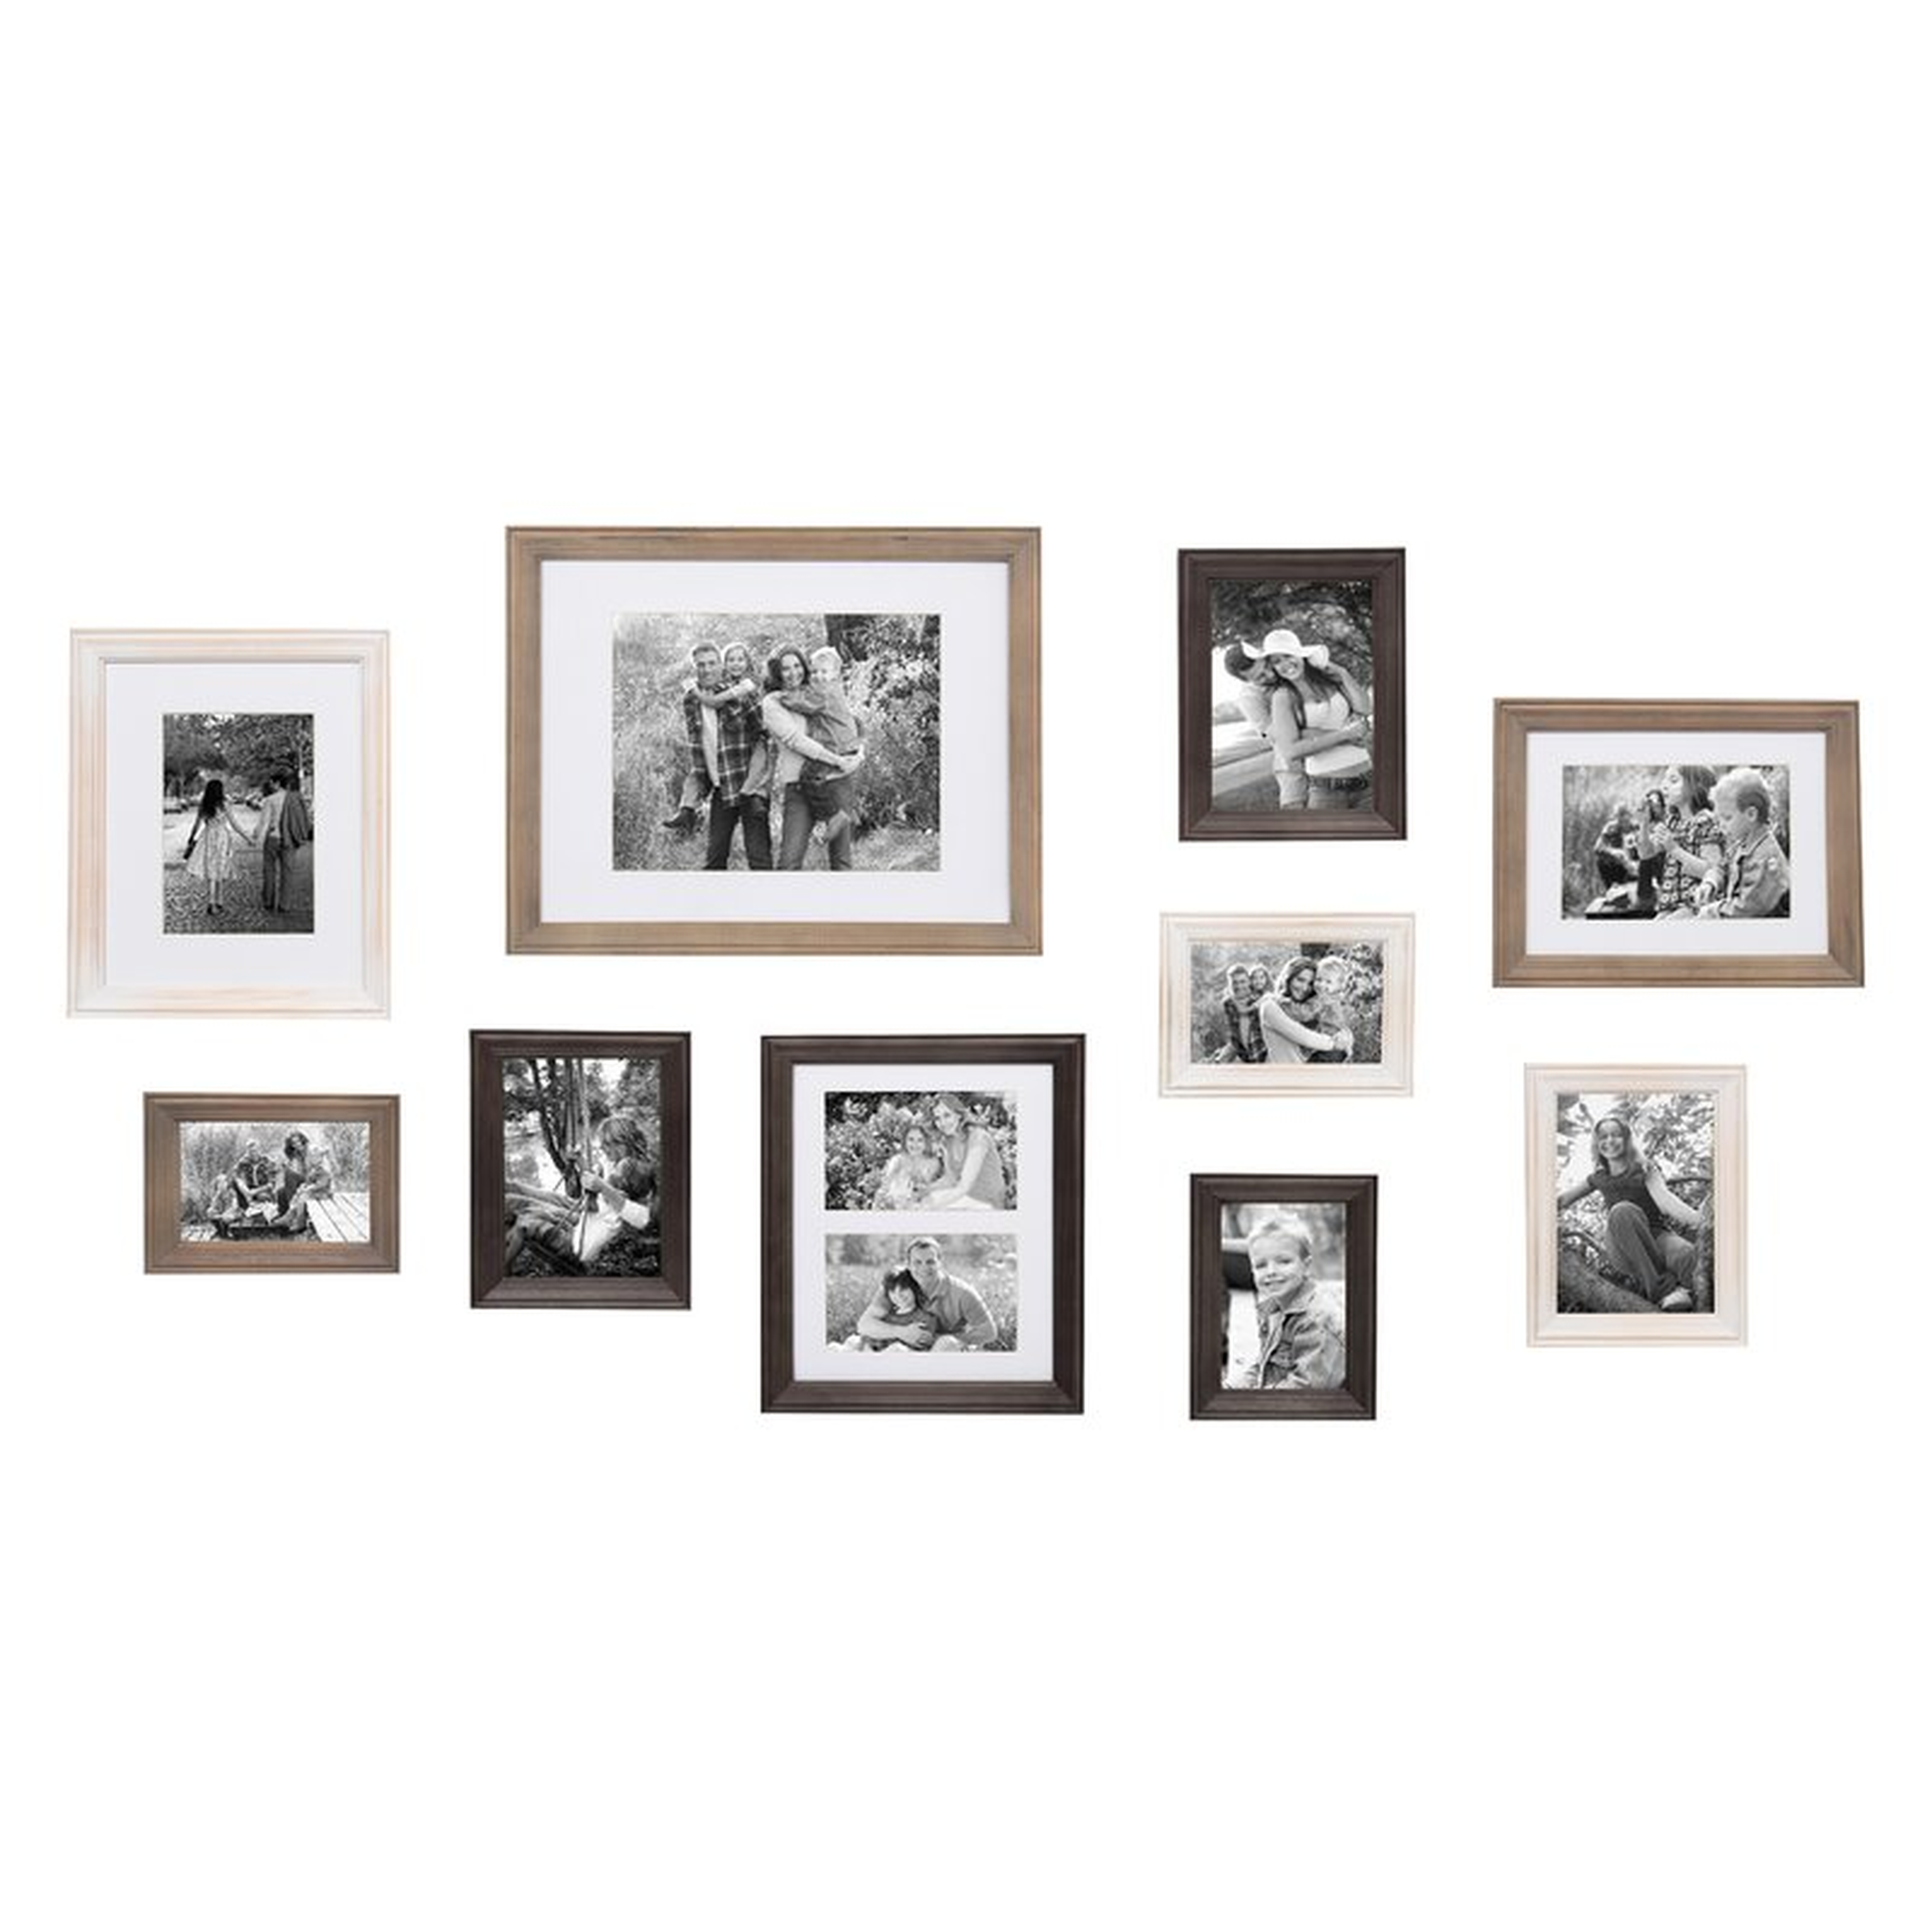 10 Piece Sturminster Gallery Picture Frame Set-White Wash/Charcoal Gray/Rustic Gray - Wayfair